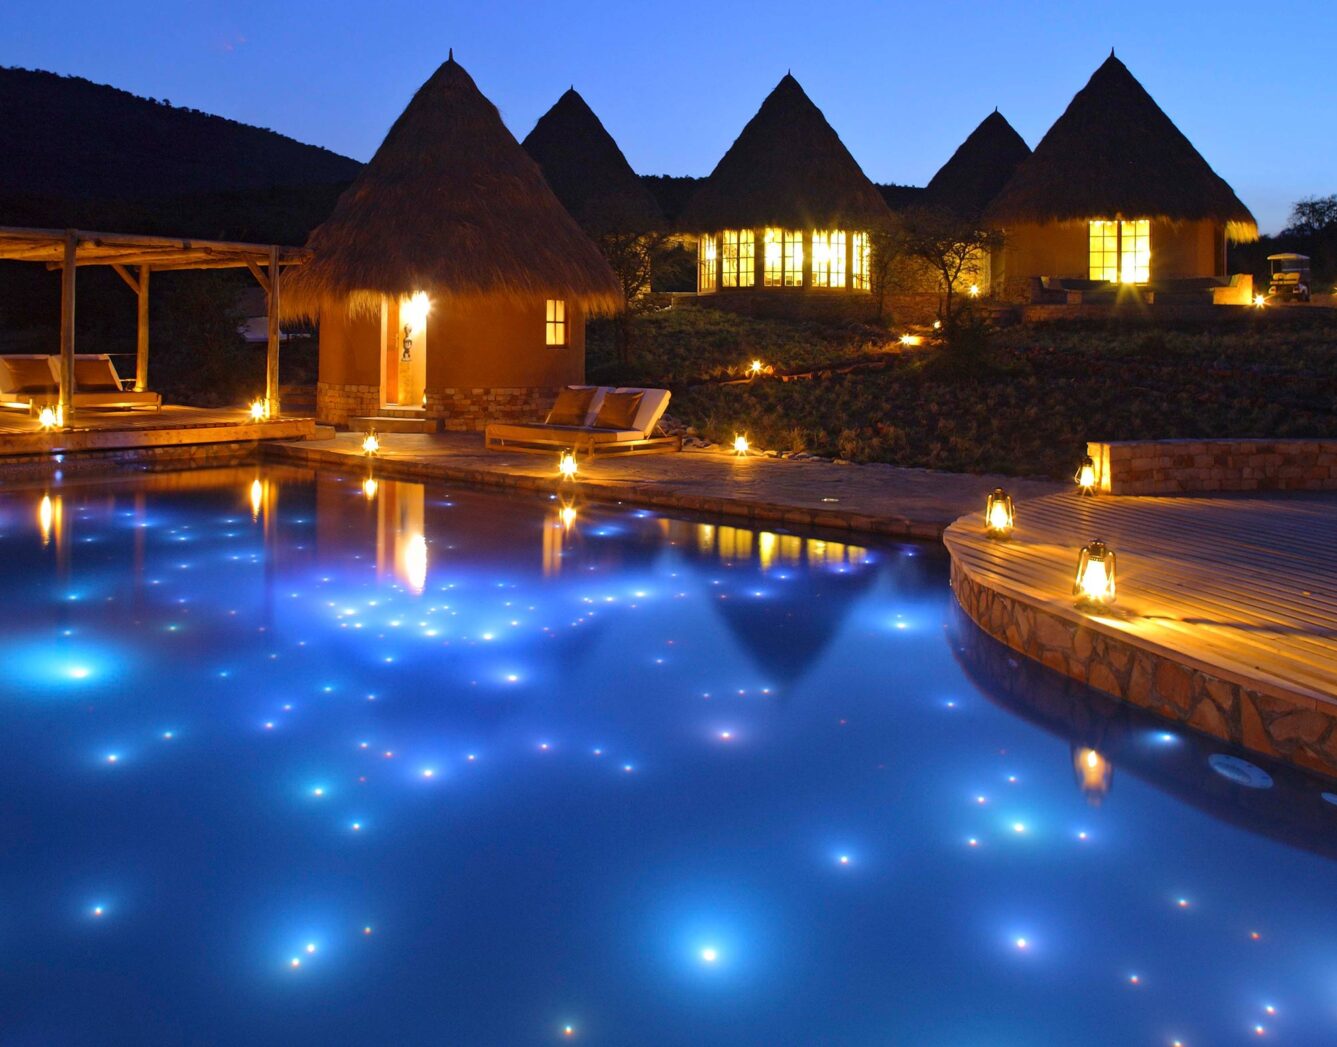 Star lit pool in front of the spa reception building